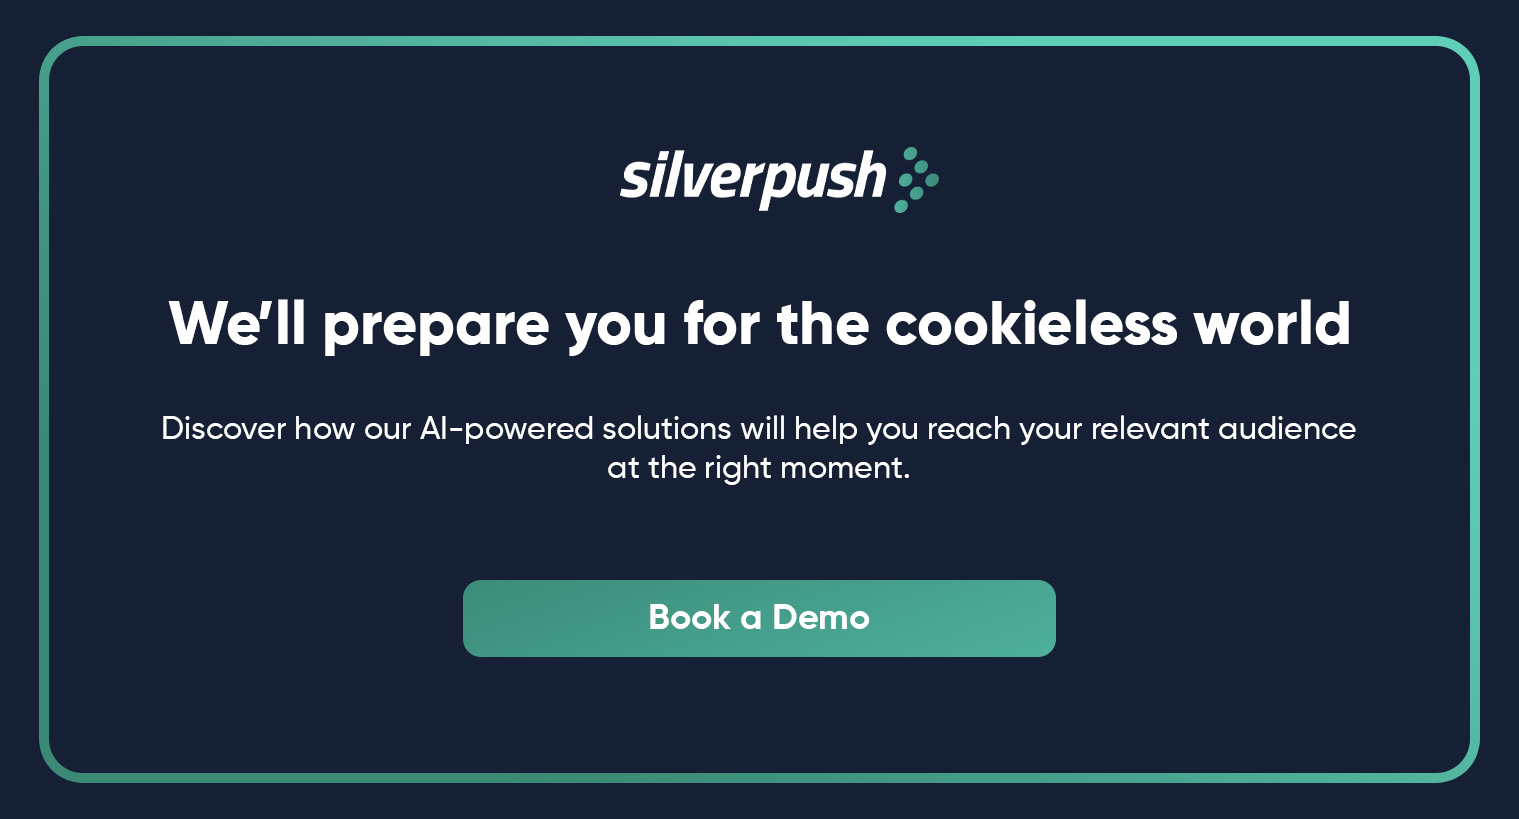 Silverpush provides AI-powered solutions in the cookieless advertising world